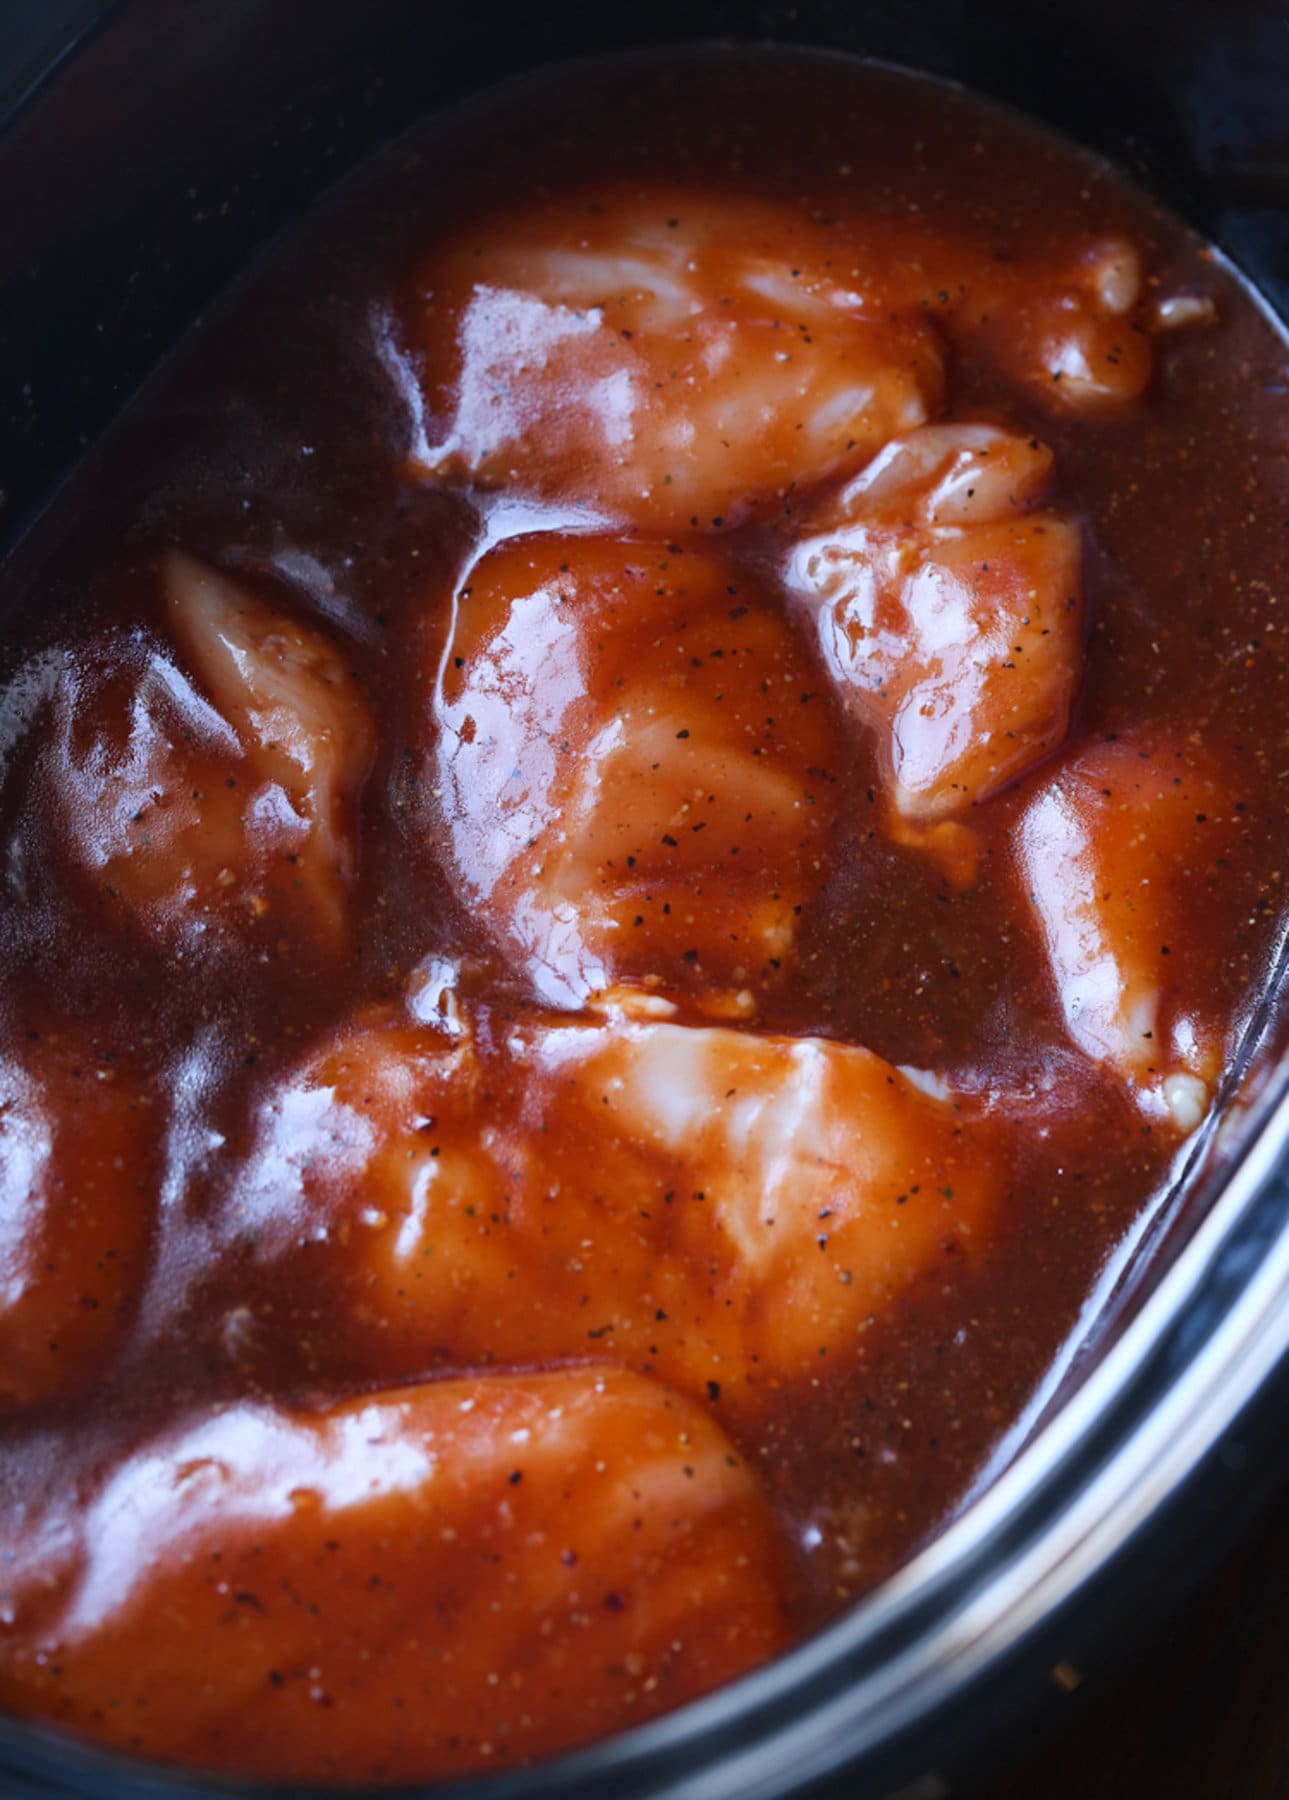 raw chicken in a crockpot slow cooker coated in BBQ sauce